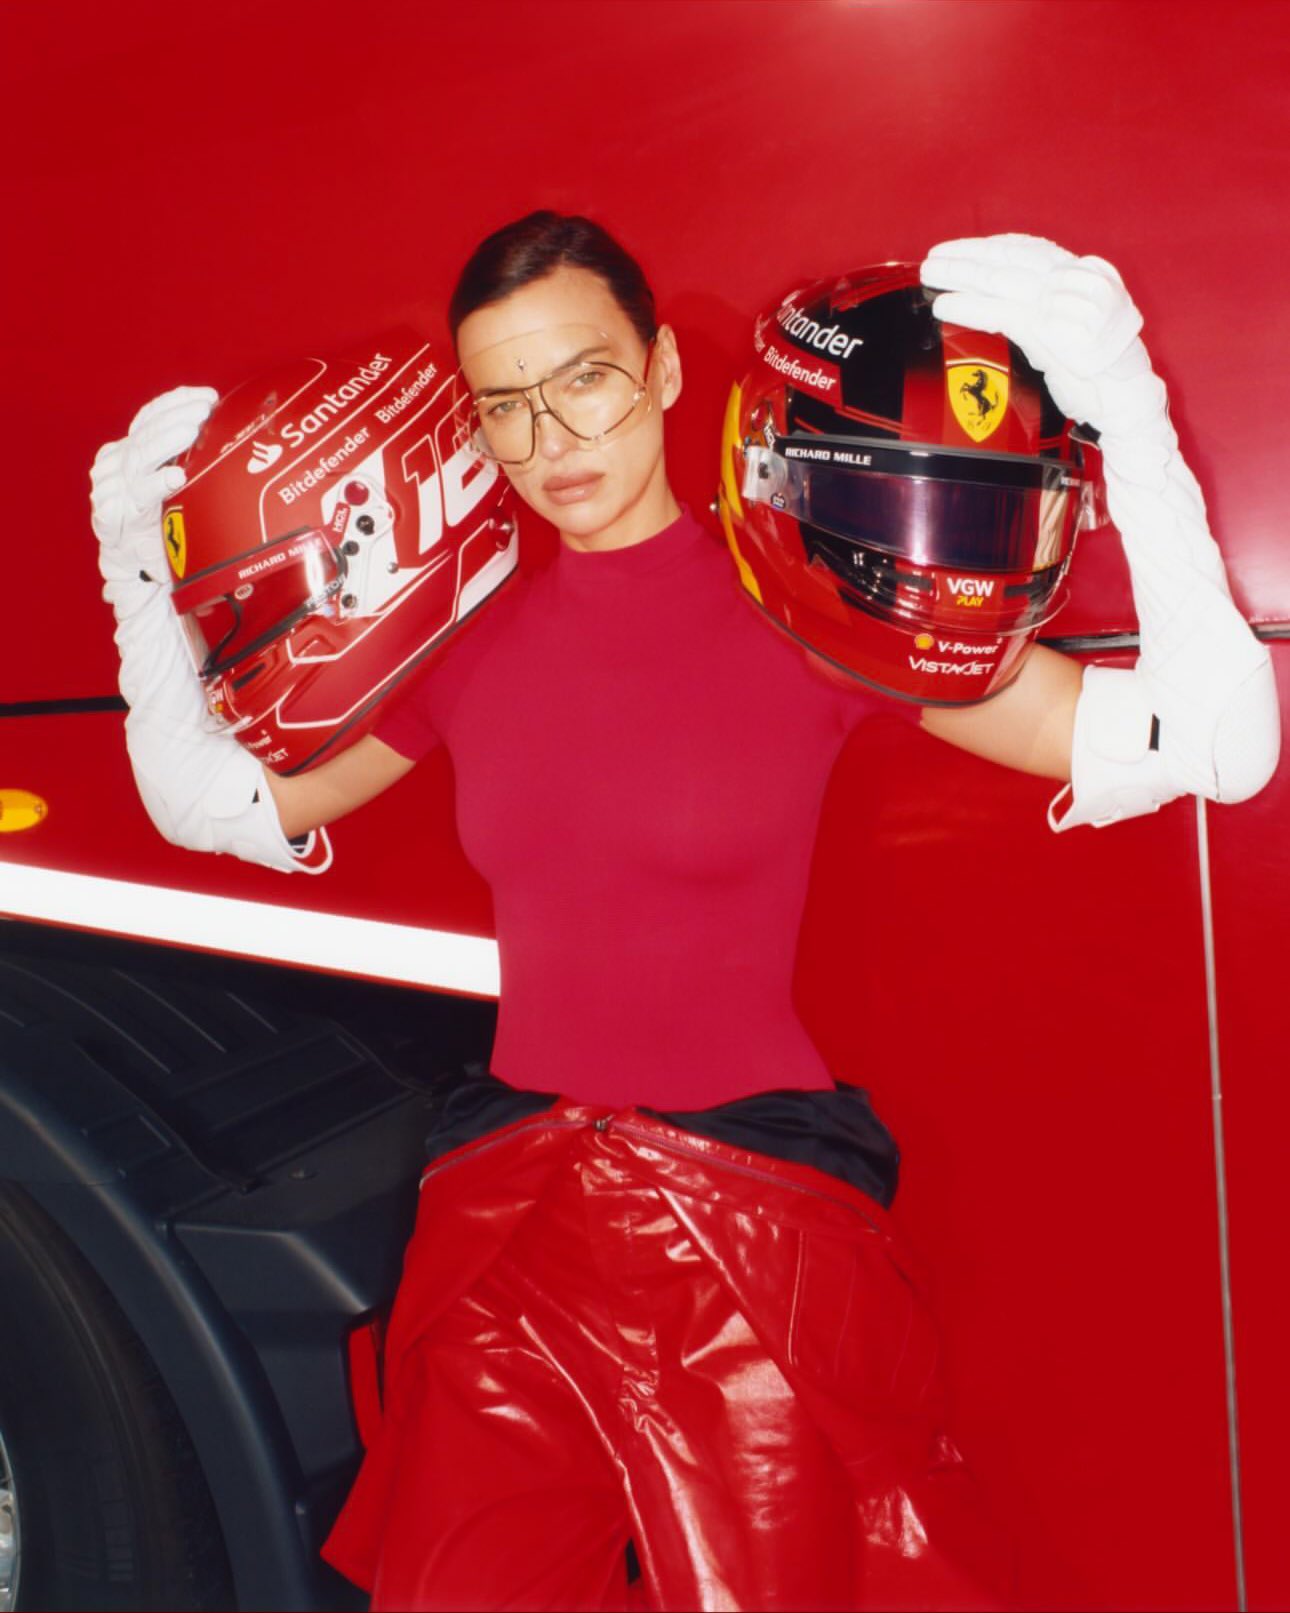 ☆ ari on X: "Irina Shayk posing with Carlos and Charles's helmet for Vogue  Italia, she's the OG 1655 ❤️✨ https://t.co/p2PmaWPIL2" / X